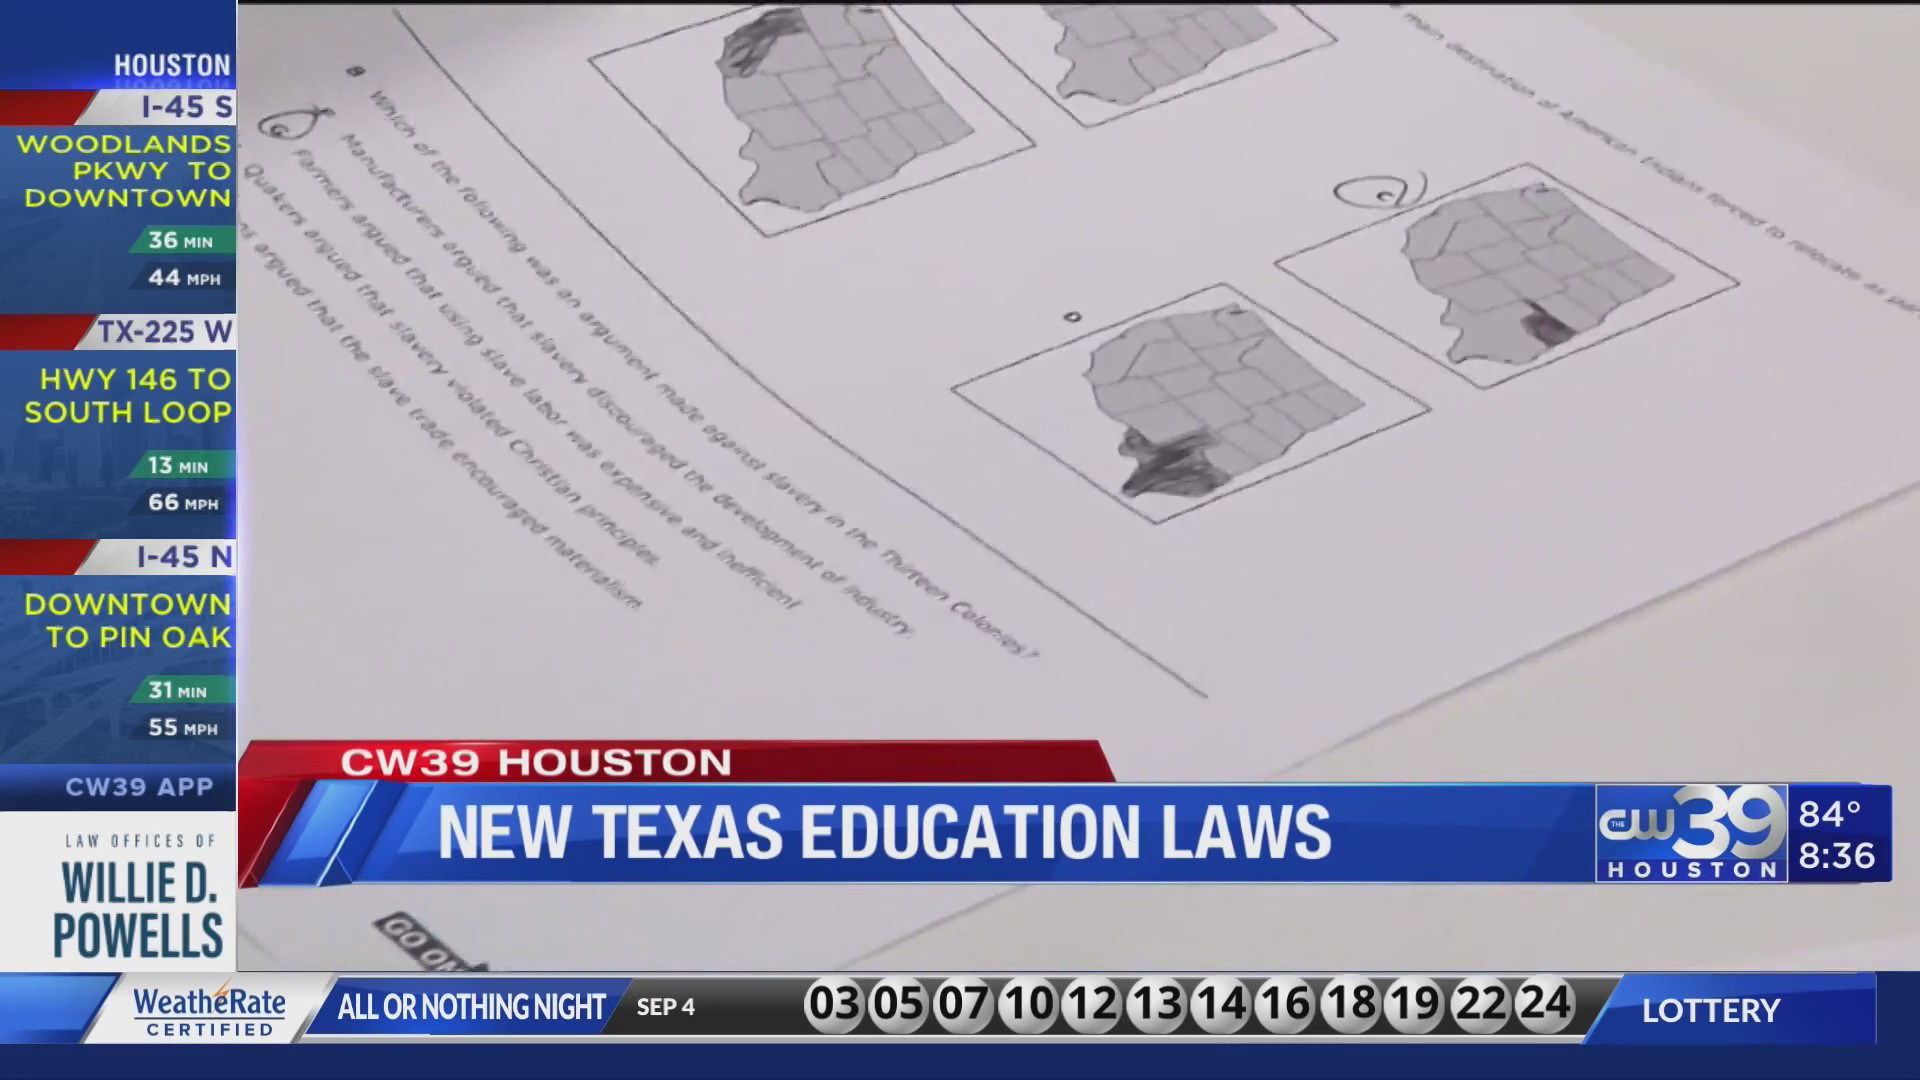 New Texas education laws passed this year